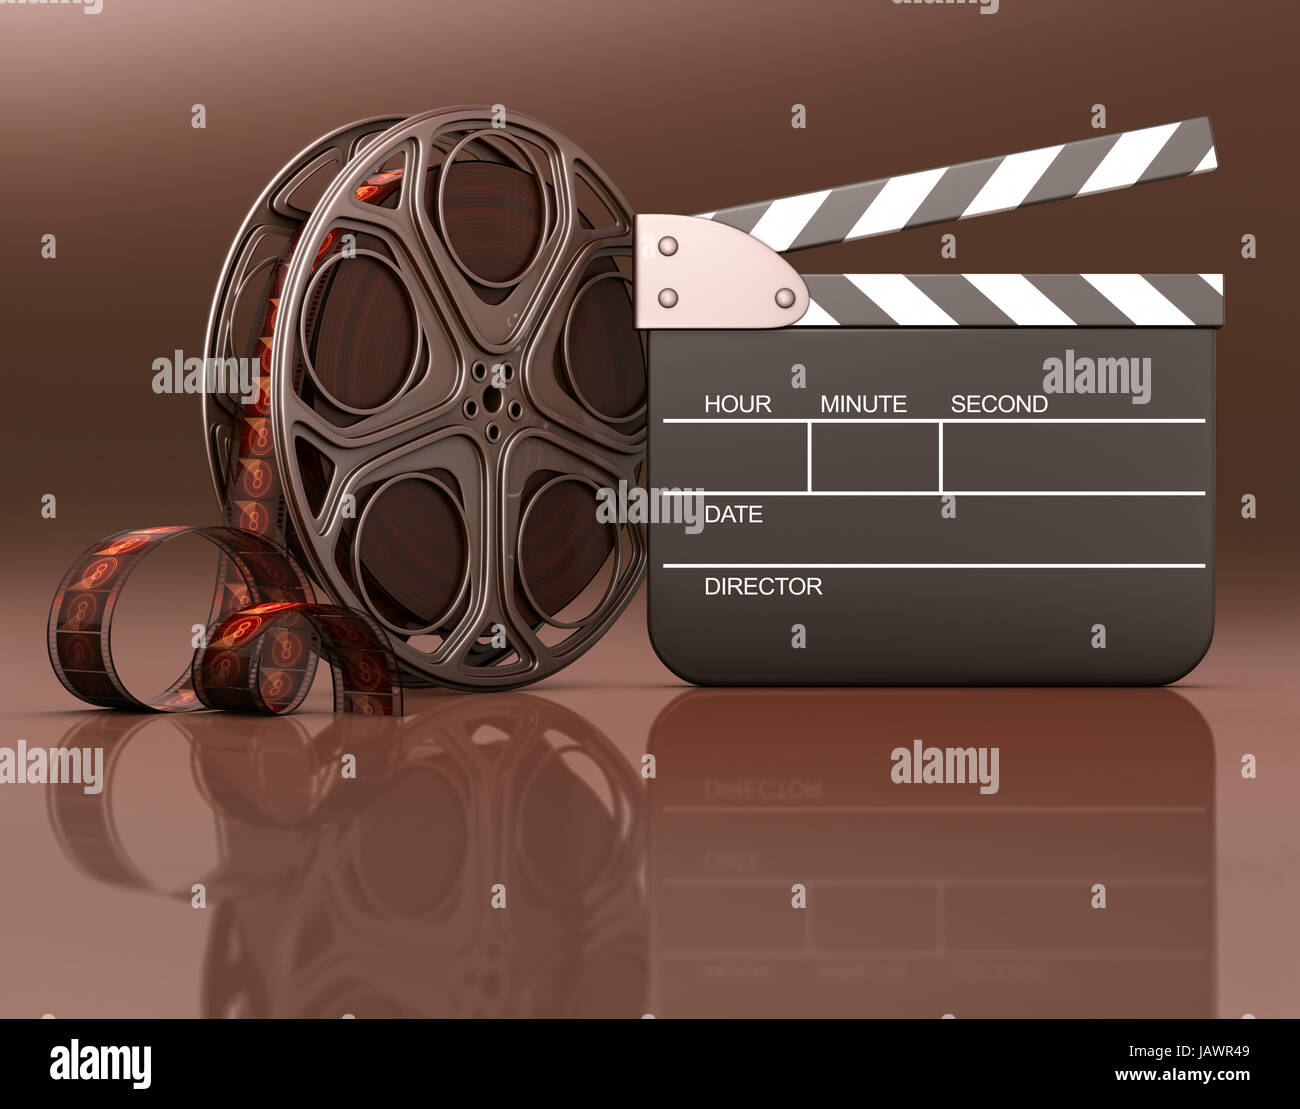 Roll of film with a clapboard beside. Your info on the black space of the clapboard or under the roll and clapboard on the reflection. Stock Photo